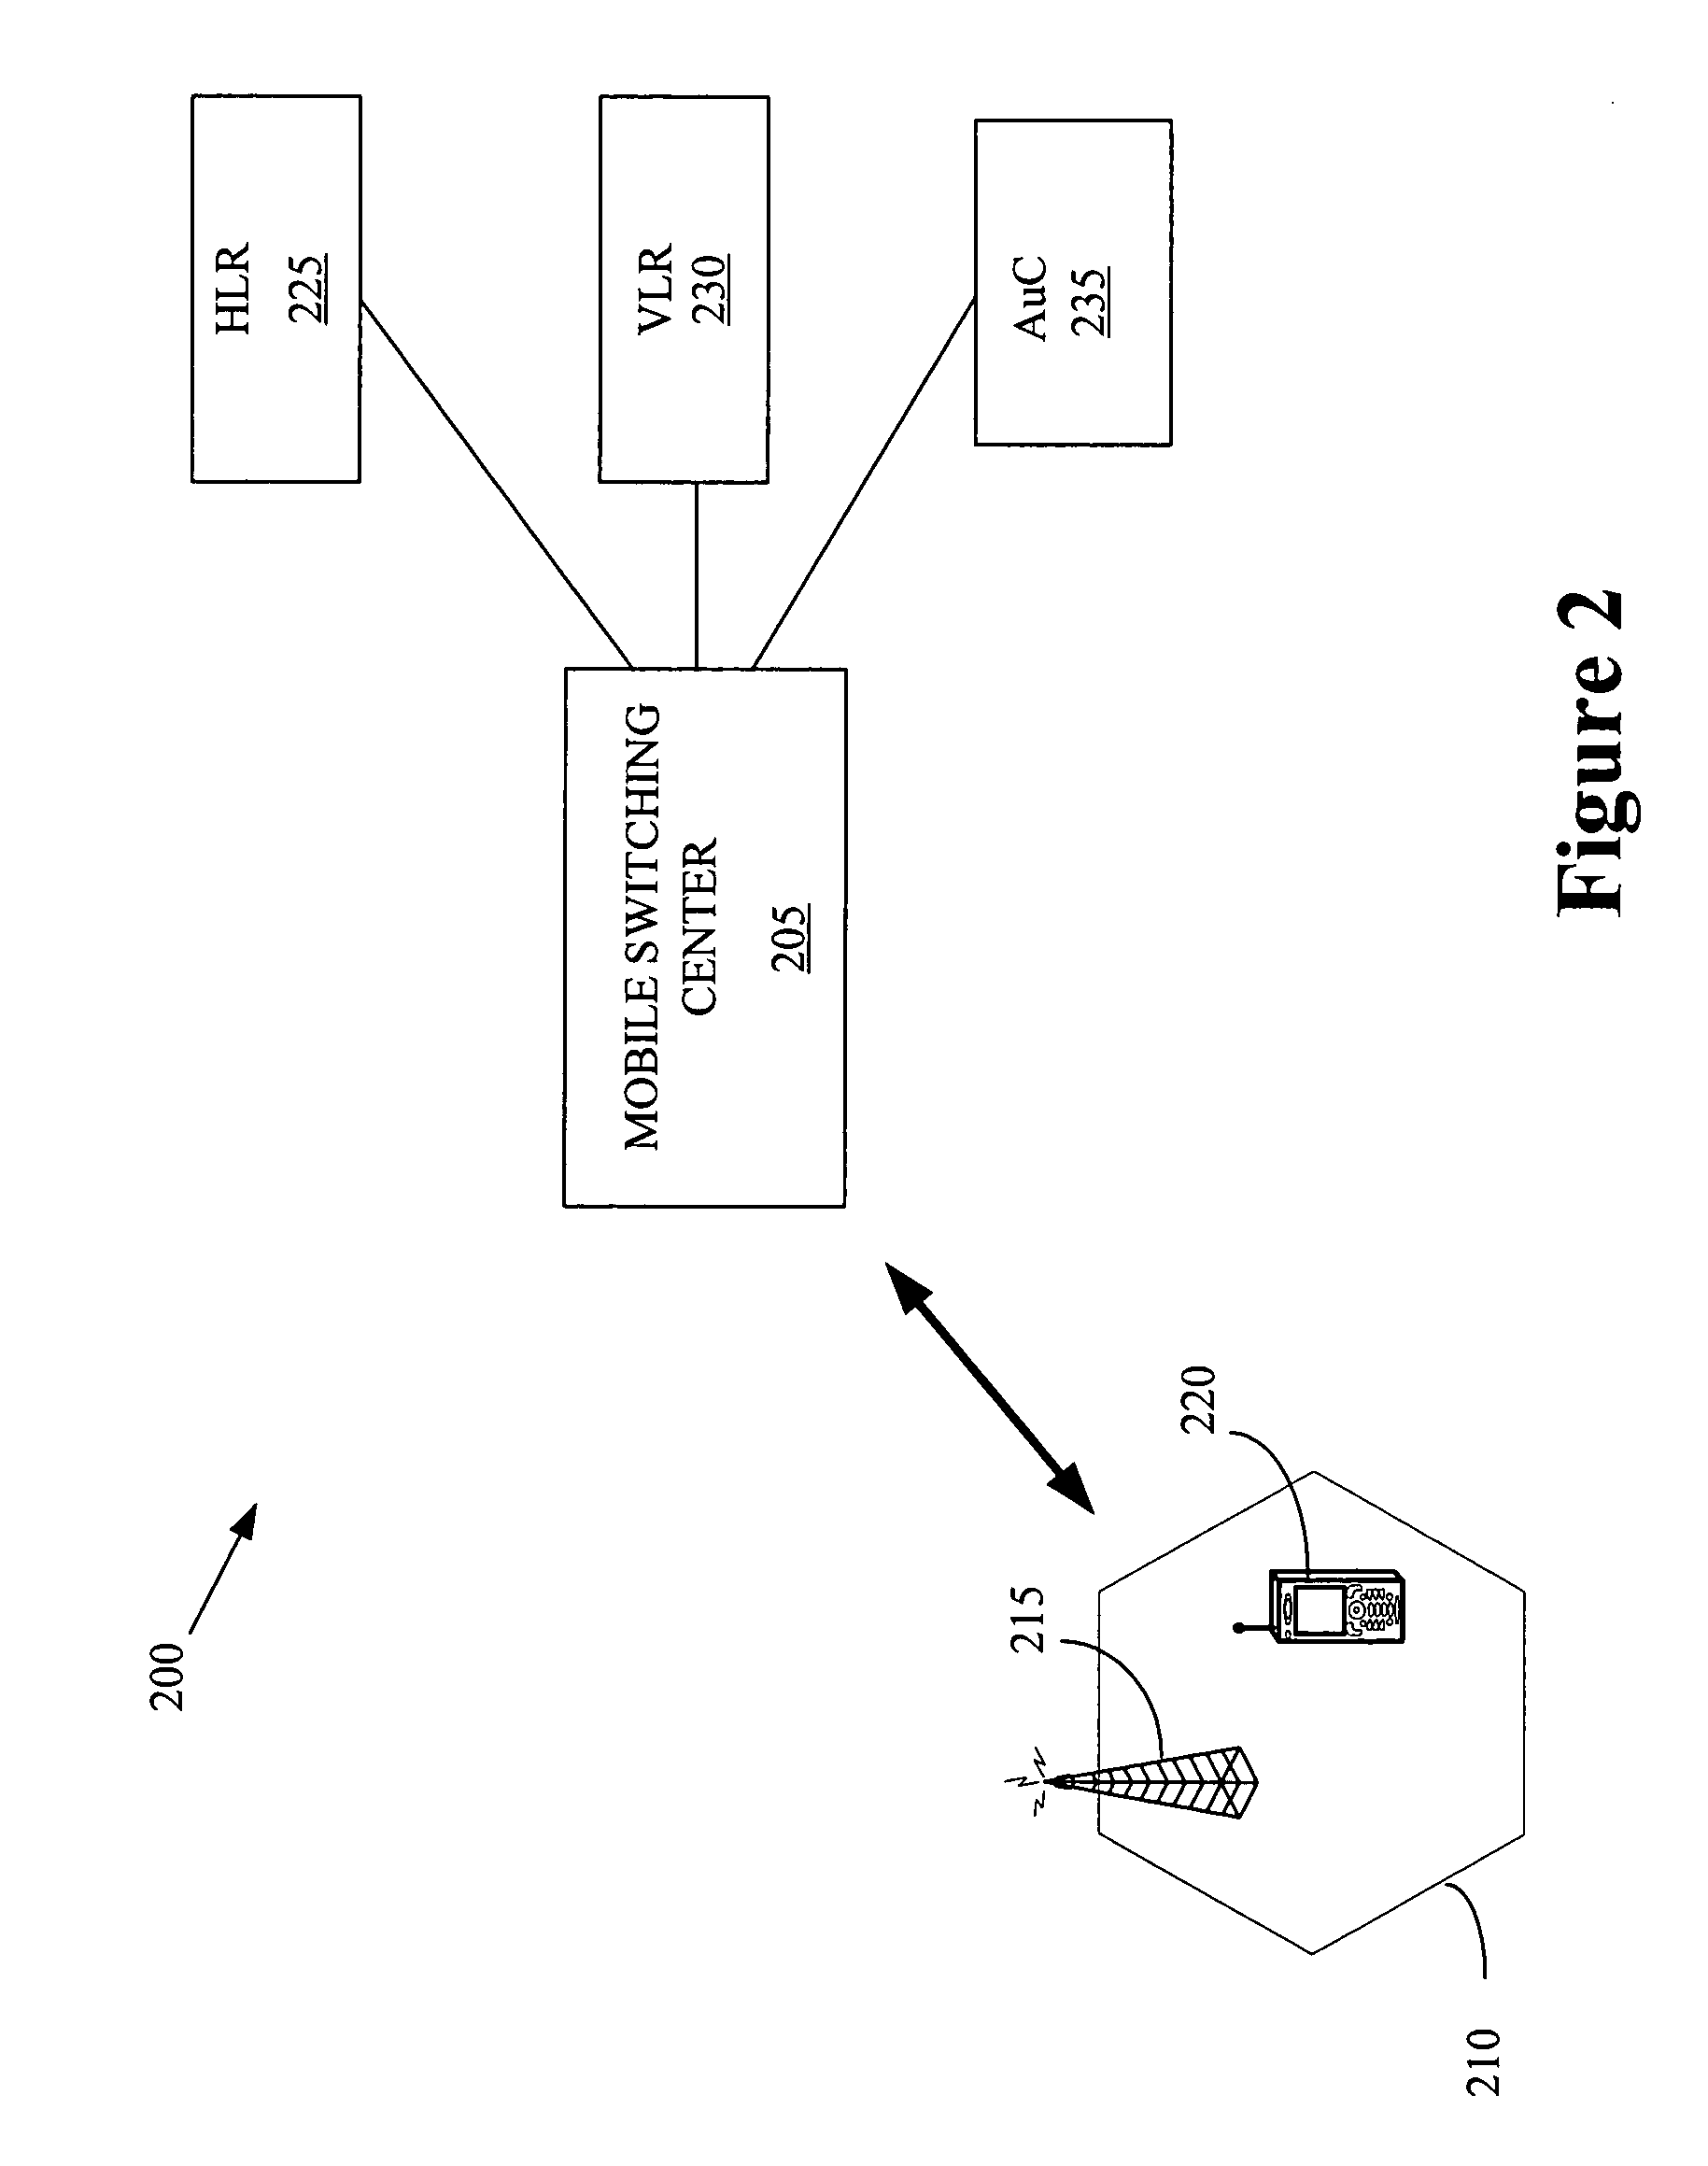 Self-synchronizing authentication and key agreement protocol